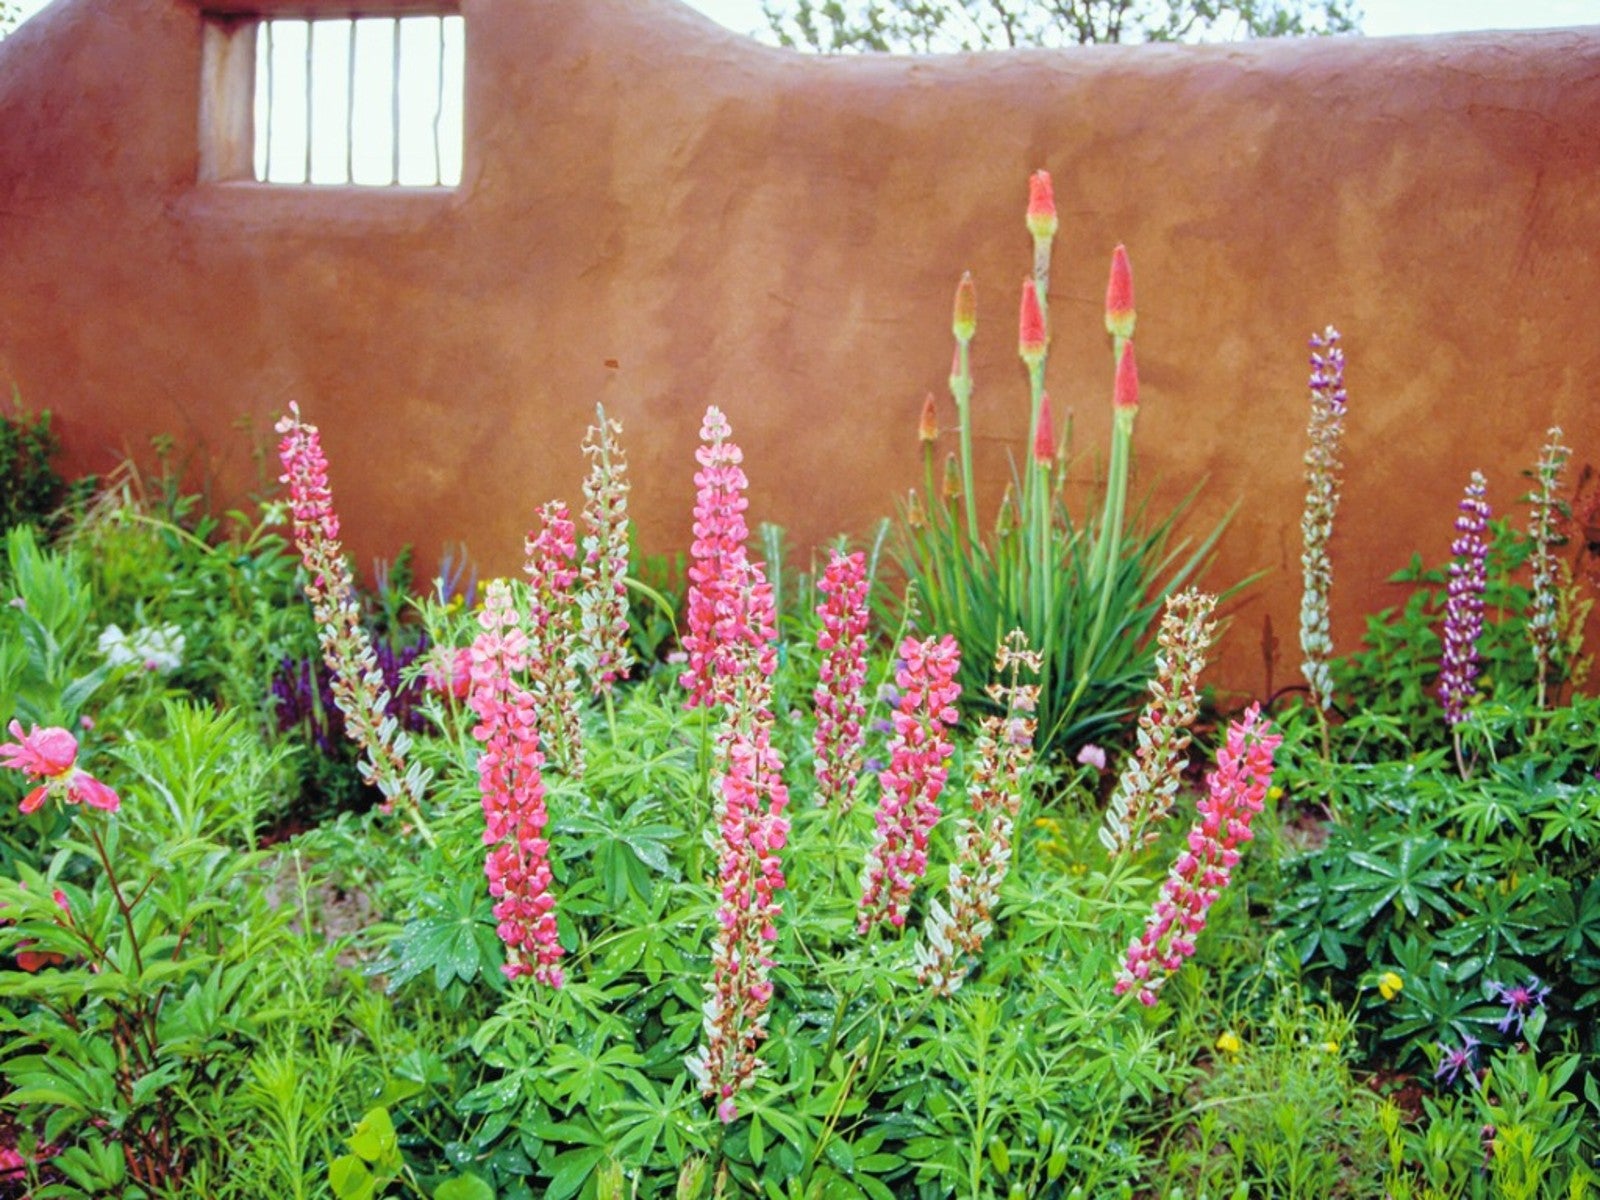 Lupine flowers growing in front of an adobe wall